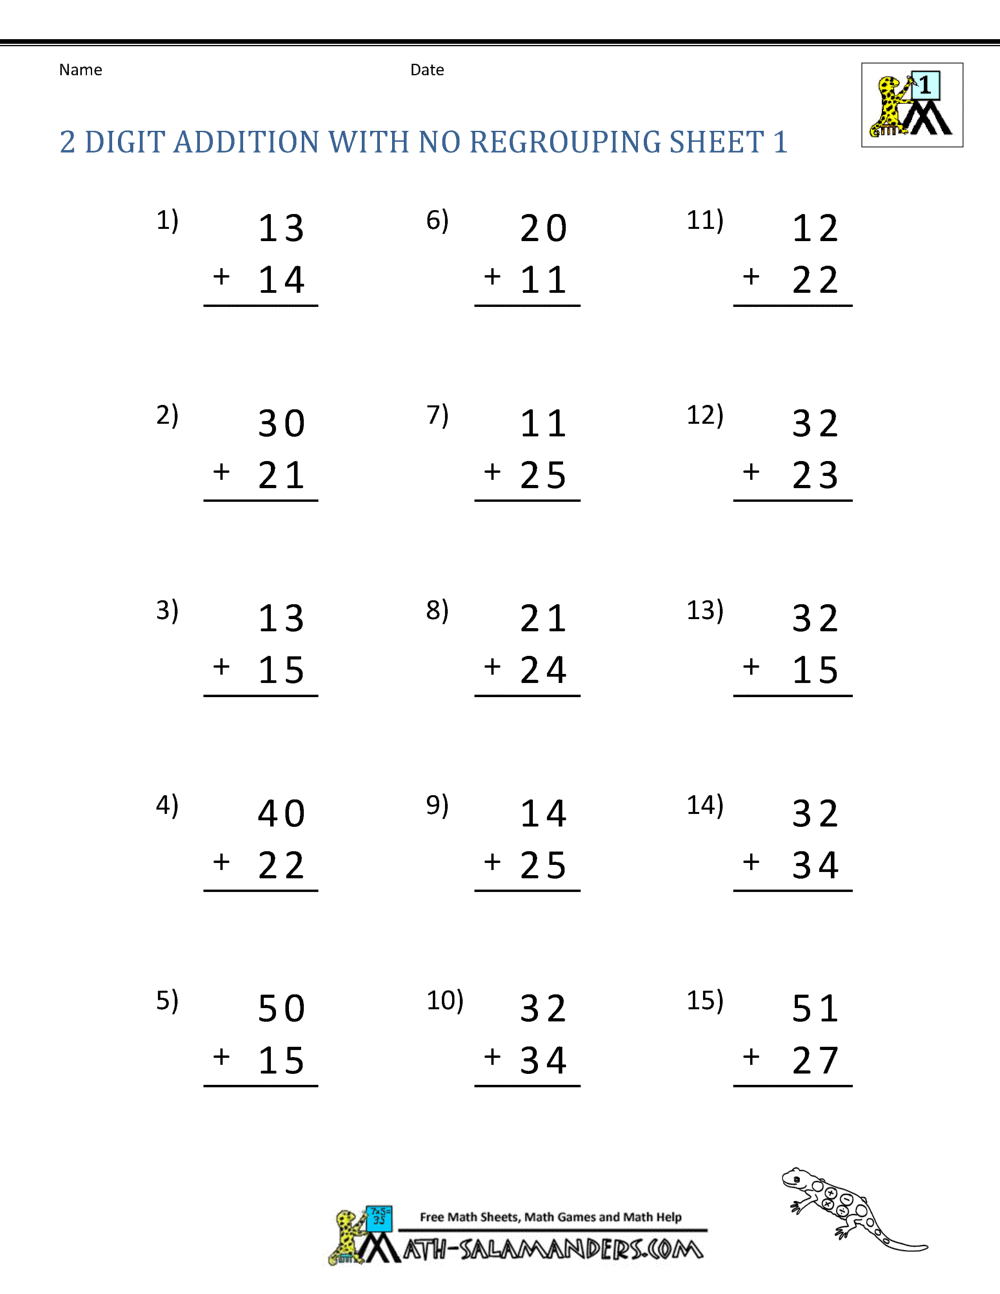 Digit Addition Without Regrouping